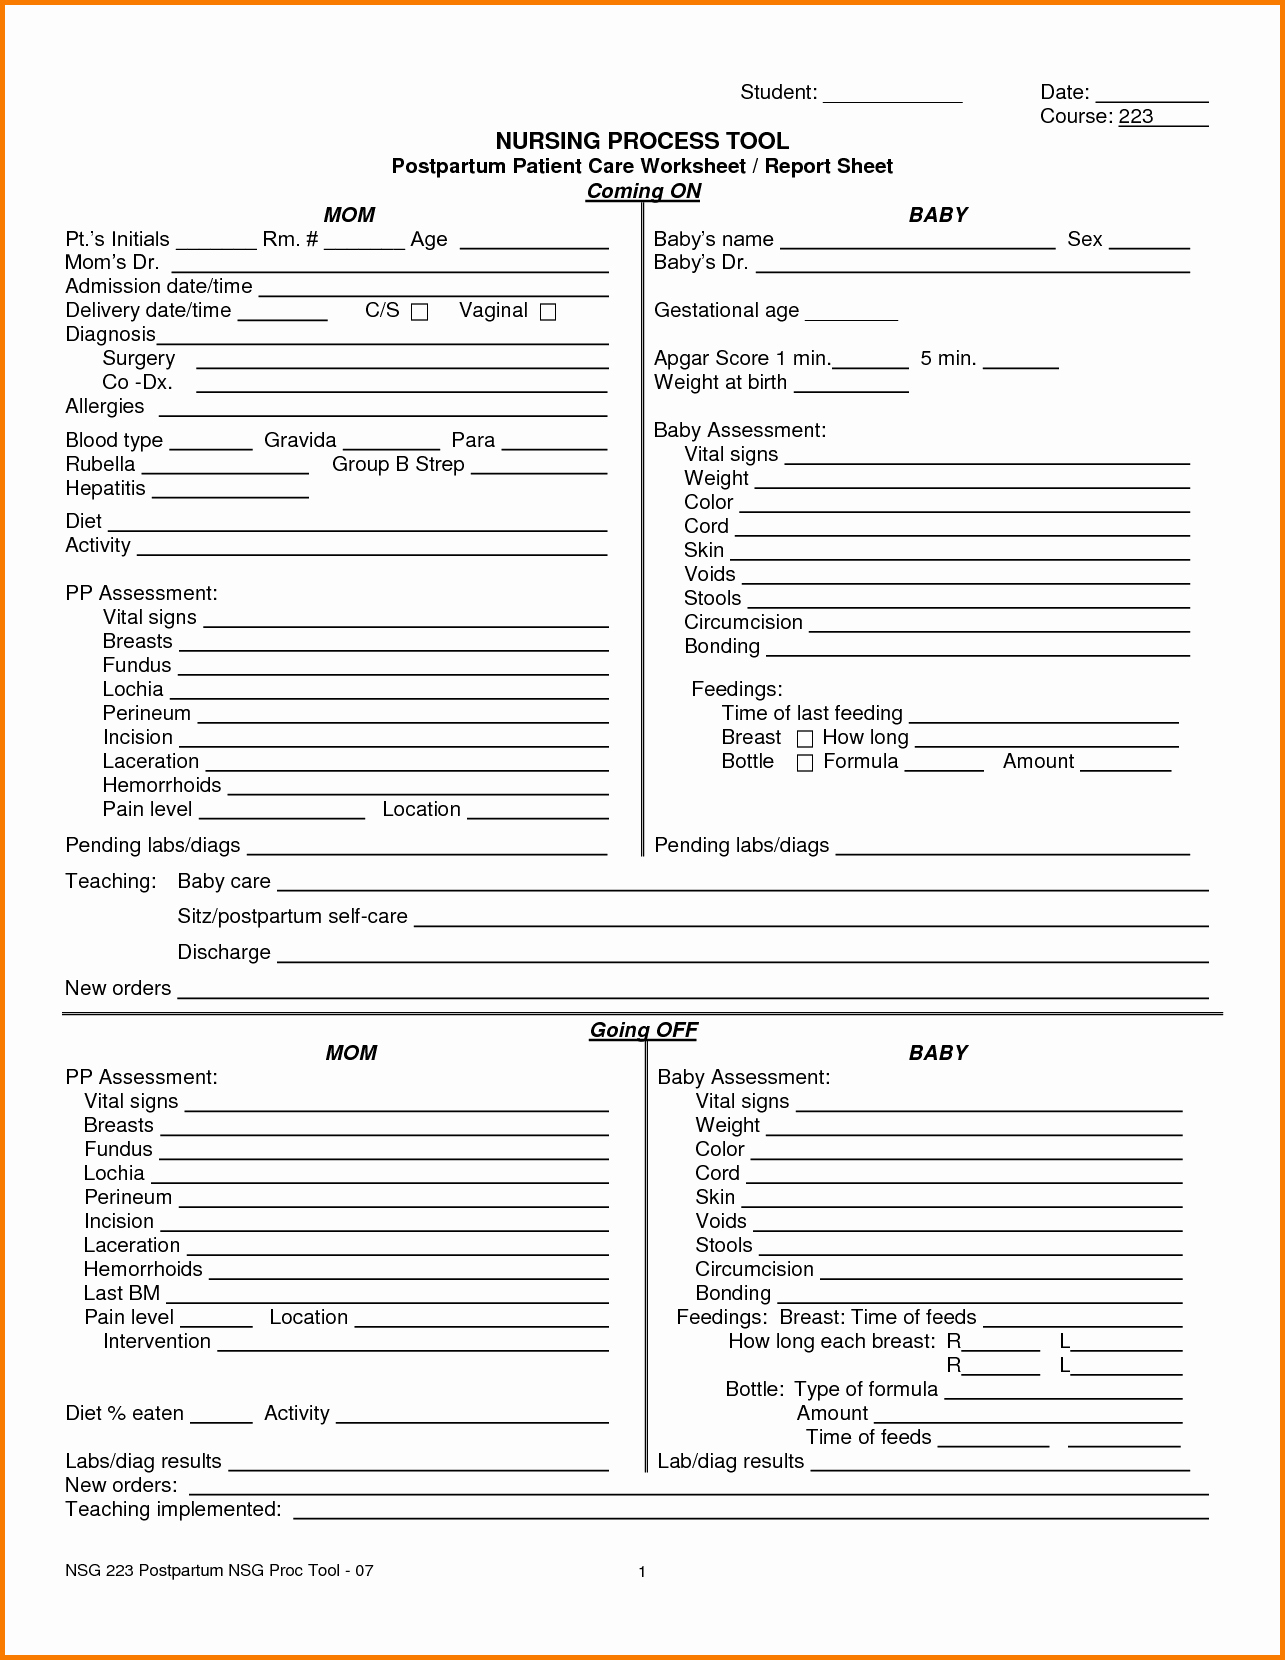 Printable Nurse Report Sheets That Are Critical | Darryl's Blog With Regard To Nurse Report Sheet Templates